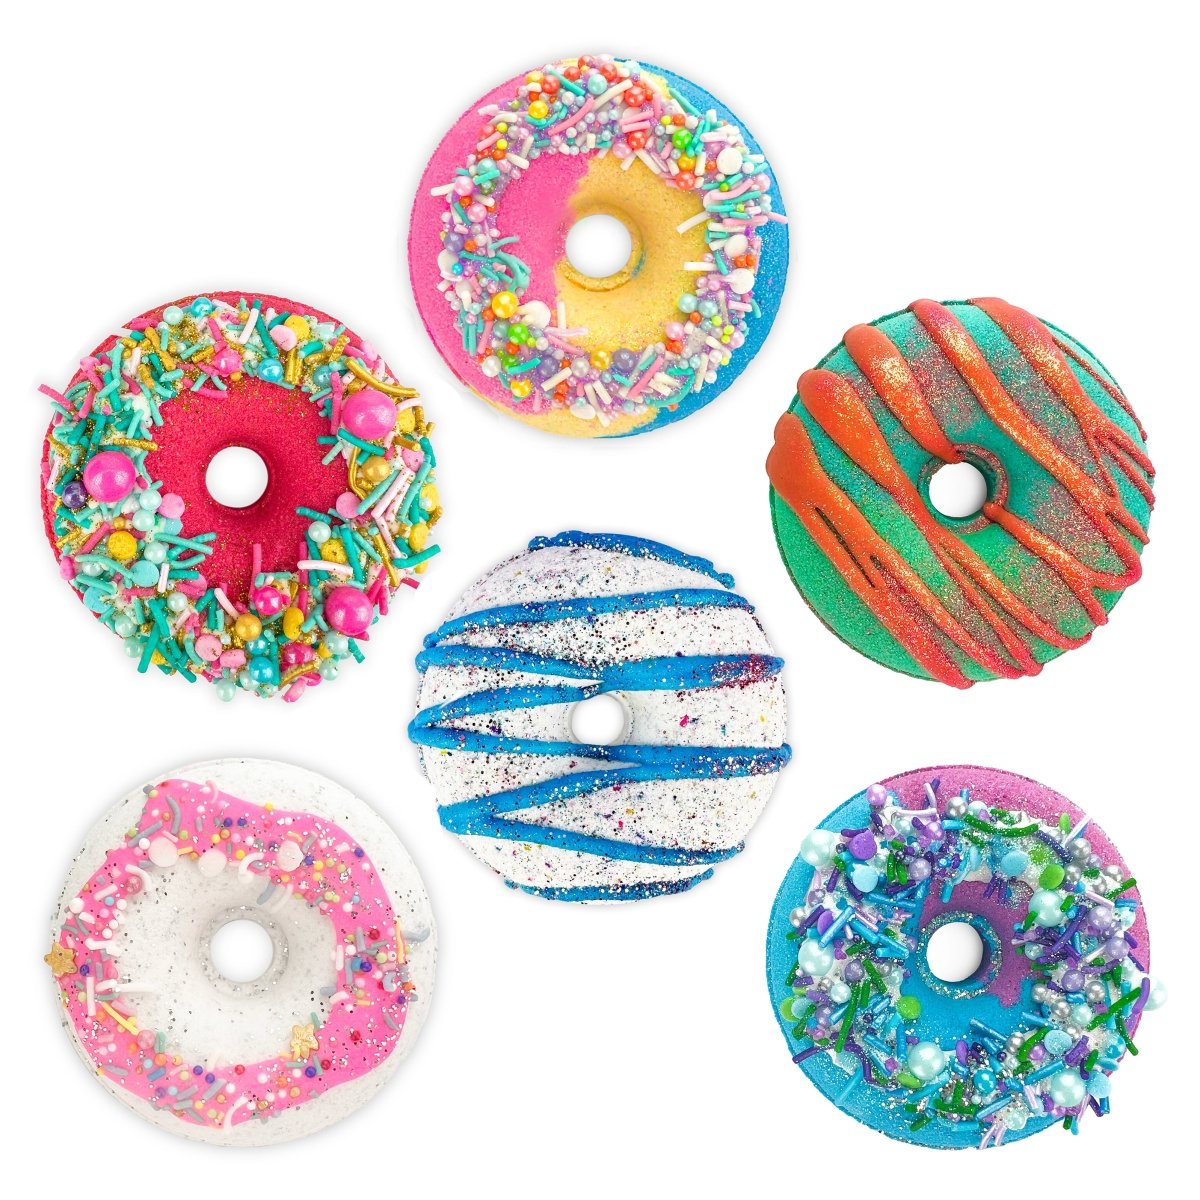 6-Pack Bath Gift Set of Large Colourful Donut Bath Bombs With Sprinkles - Made in Australia by Bath Box